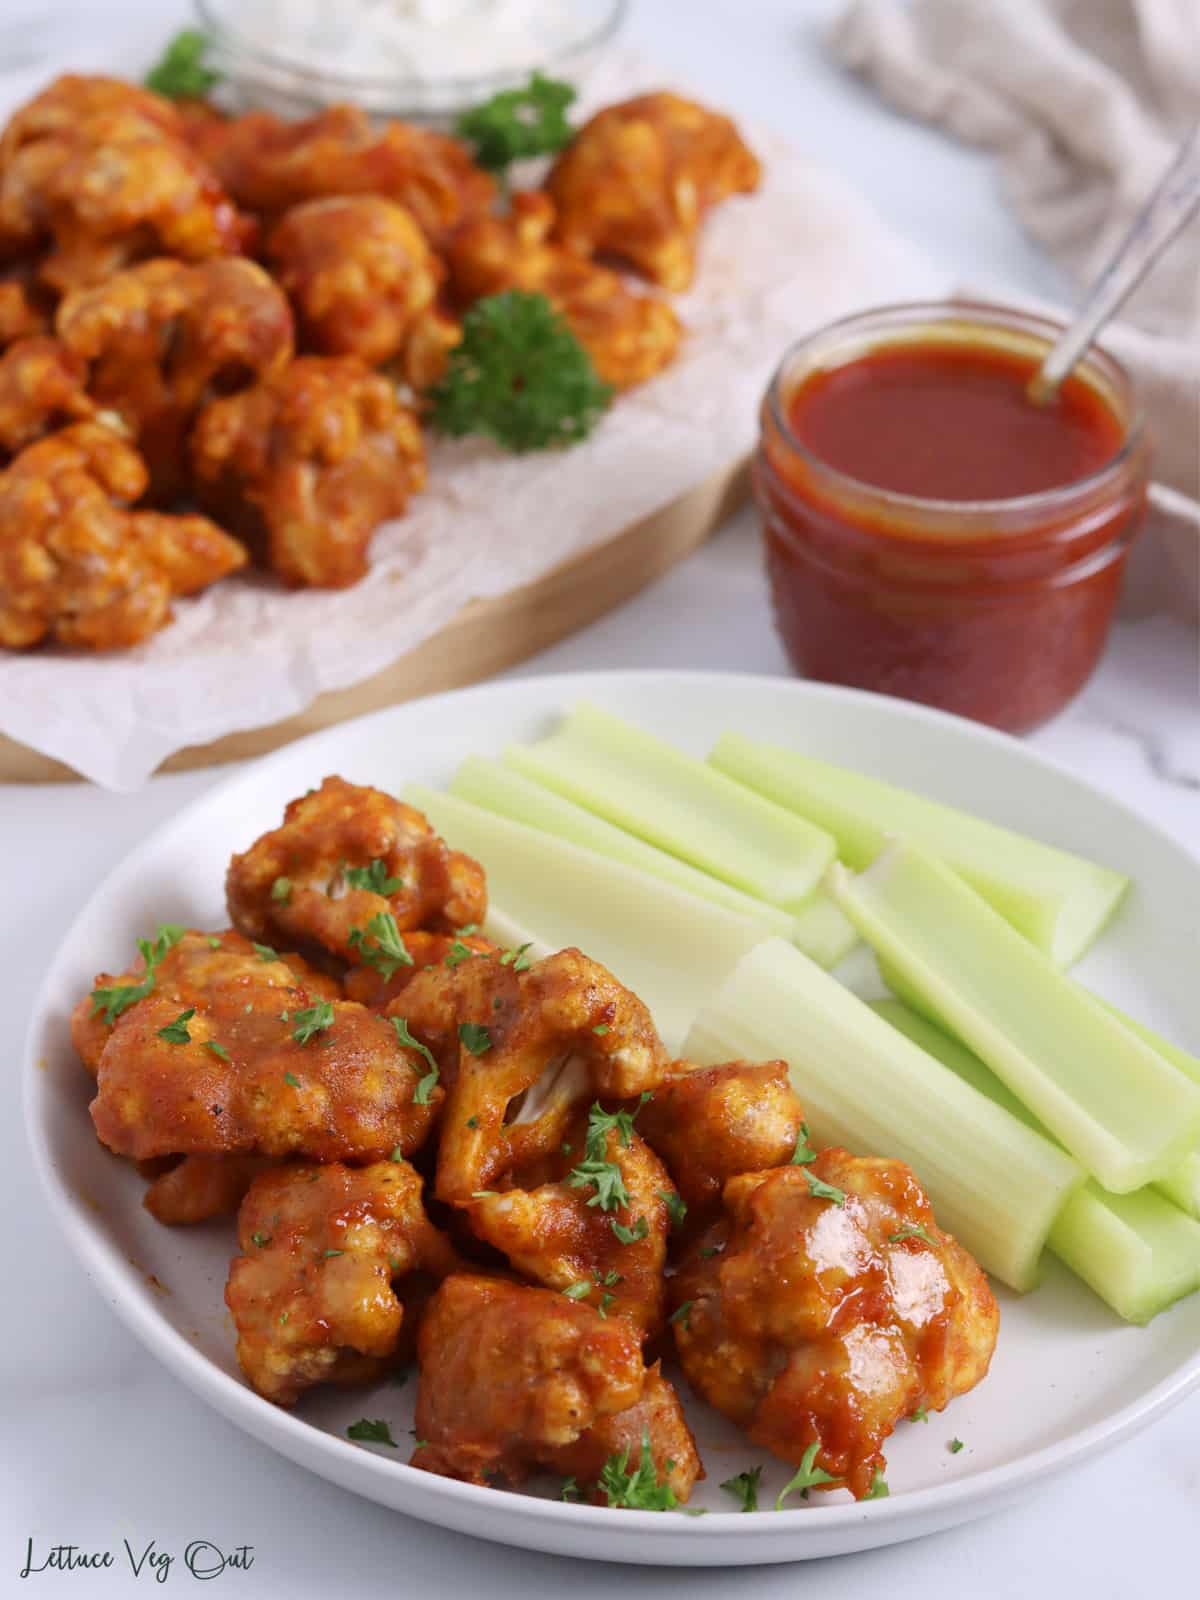 Plate with cauliflower wings and celery sticks.